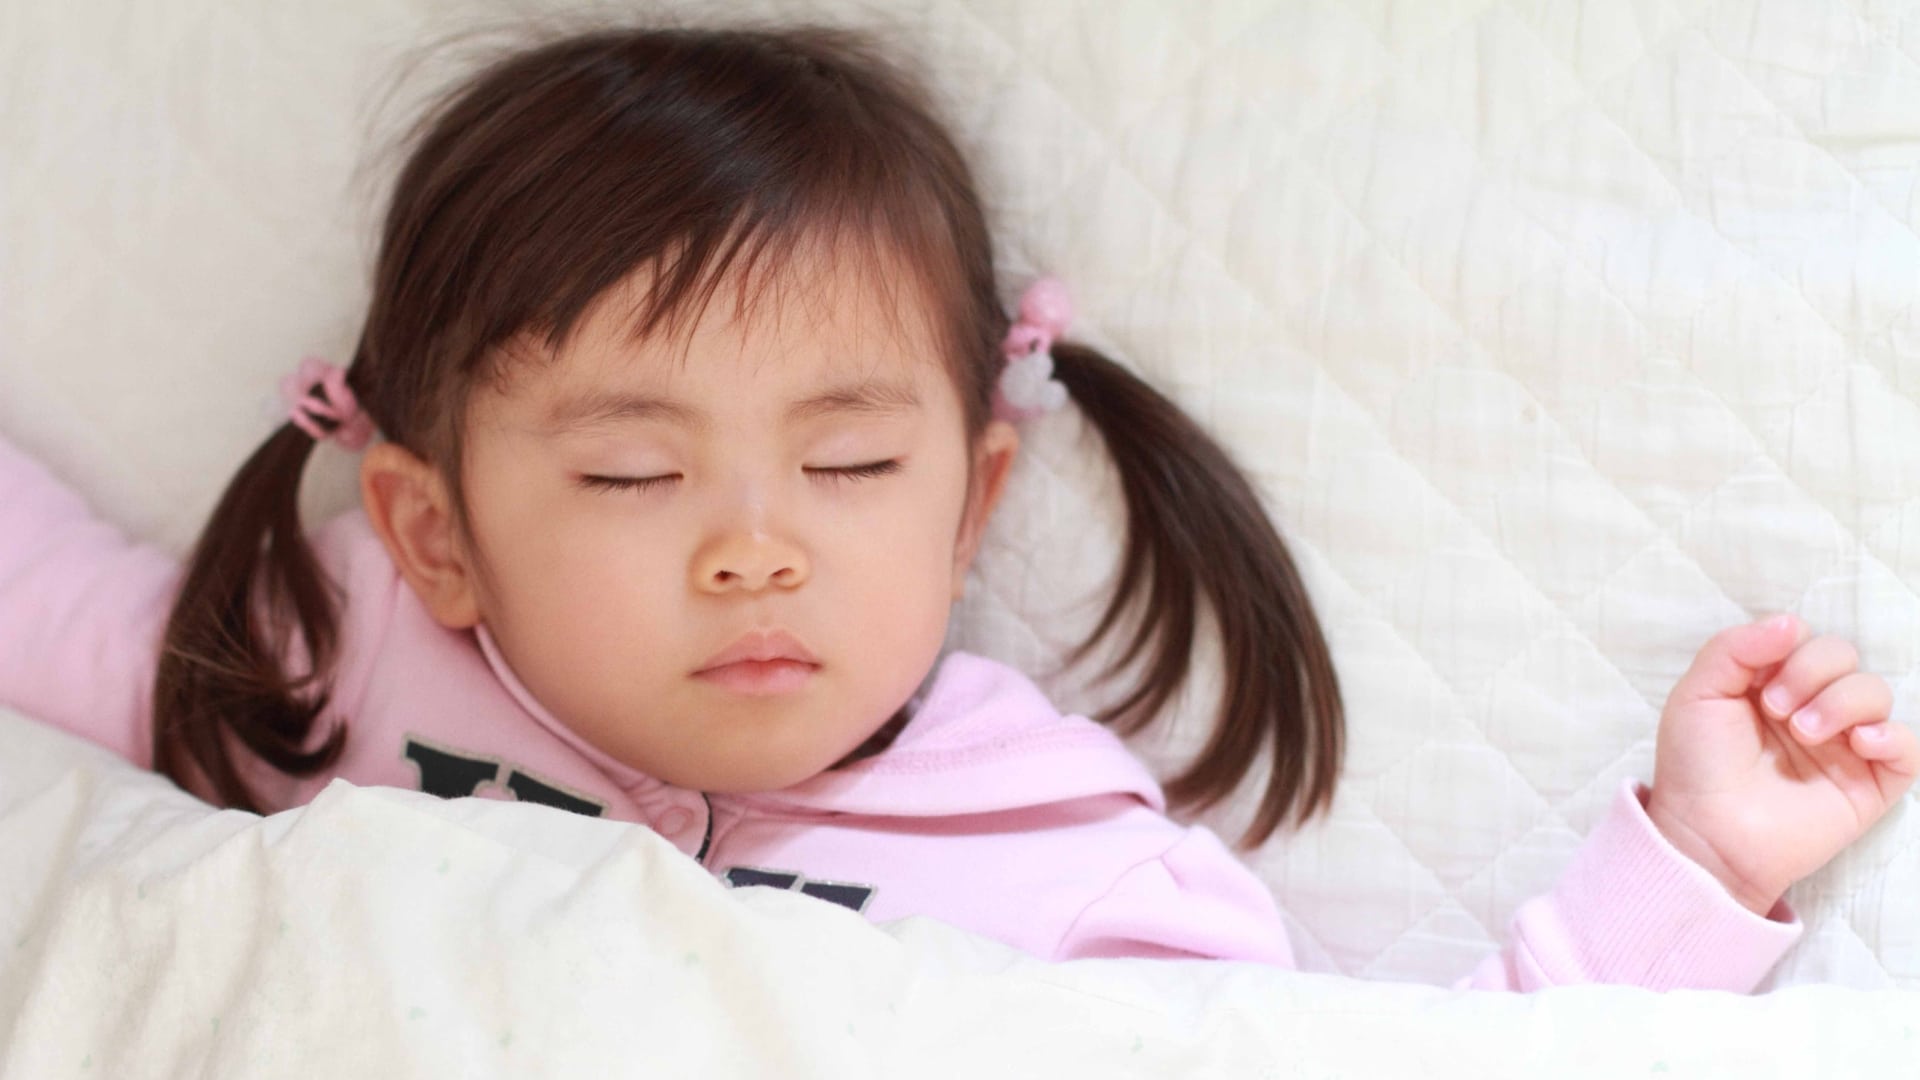 Sleep Training A 2-Year-Old Featured Image